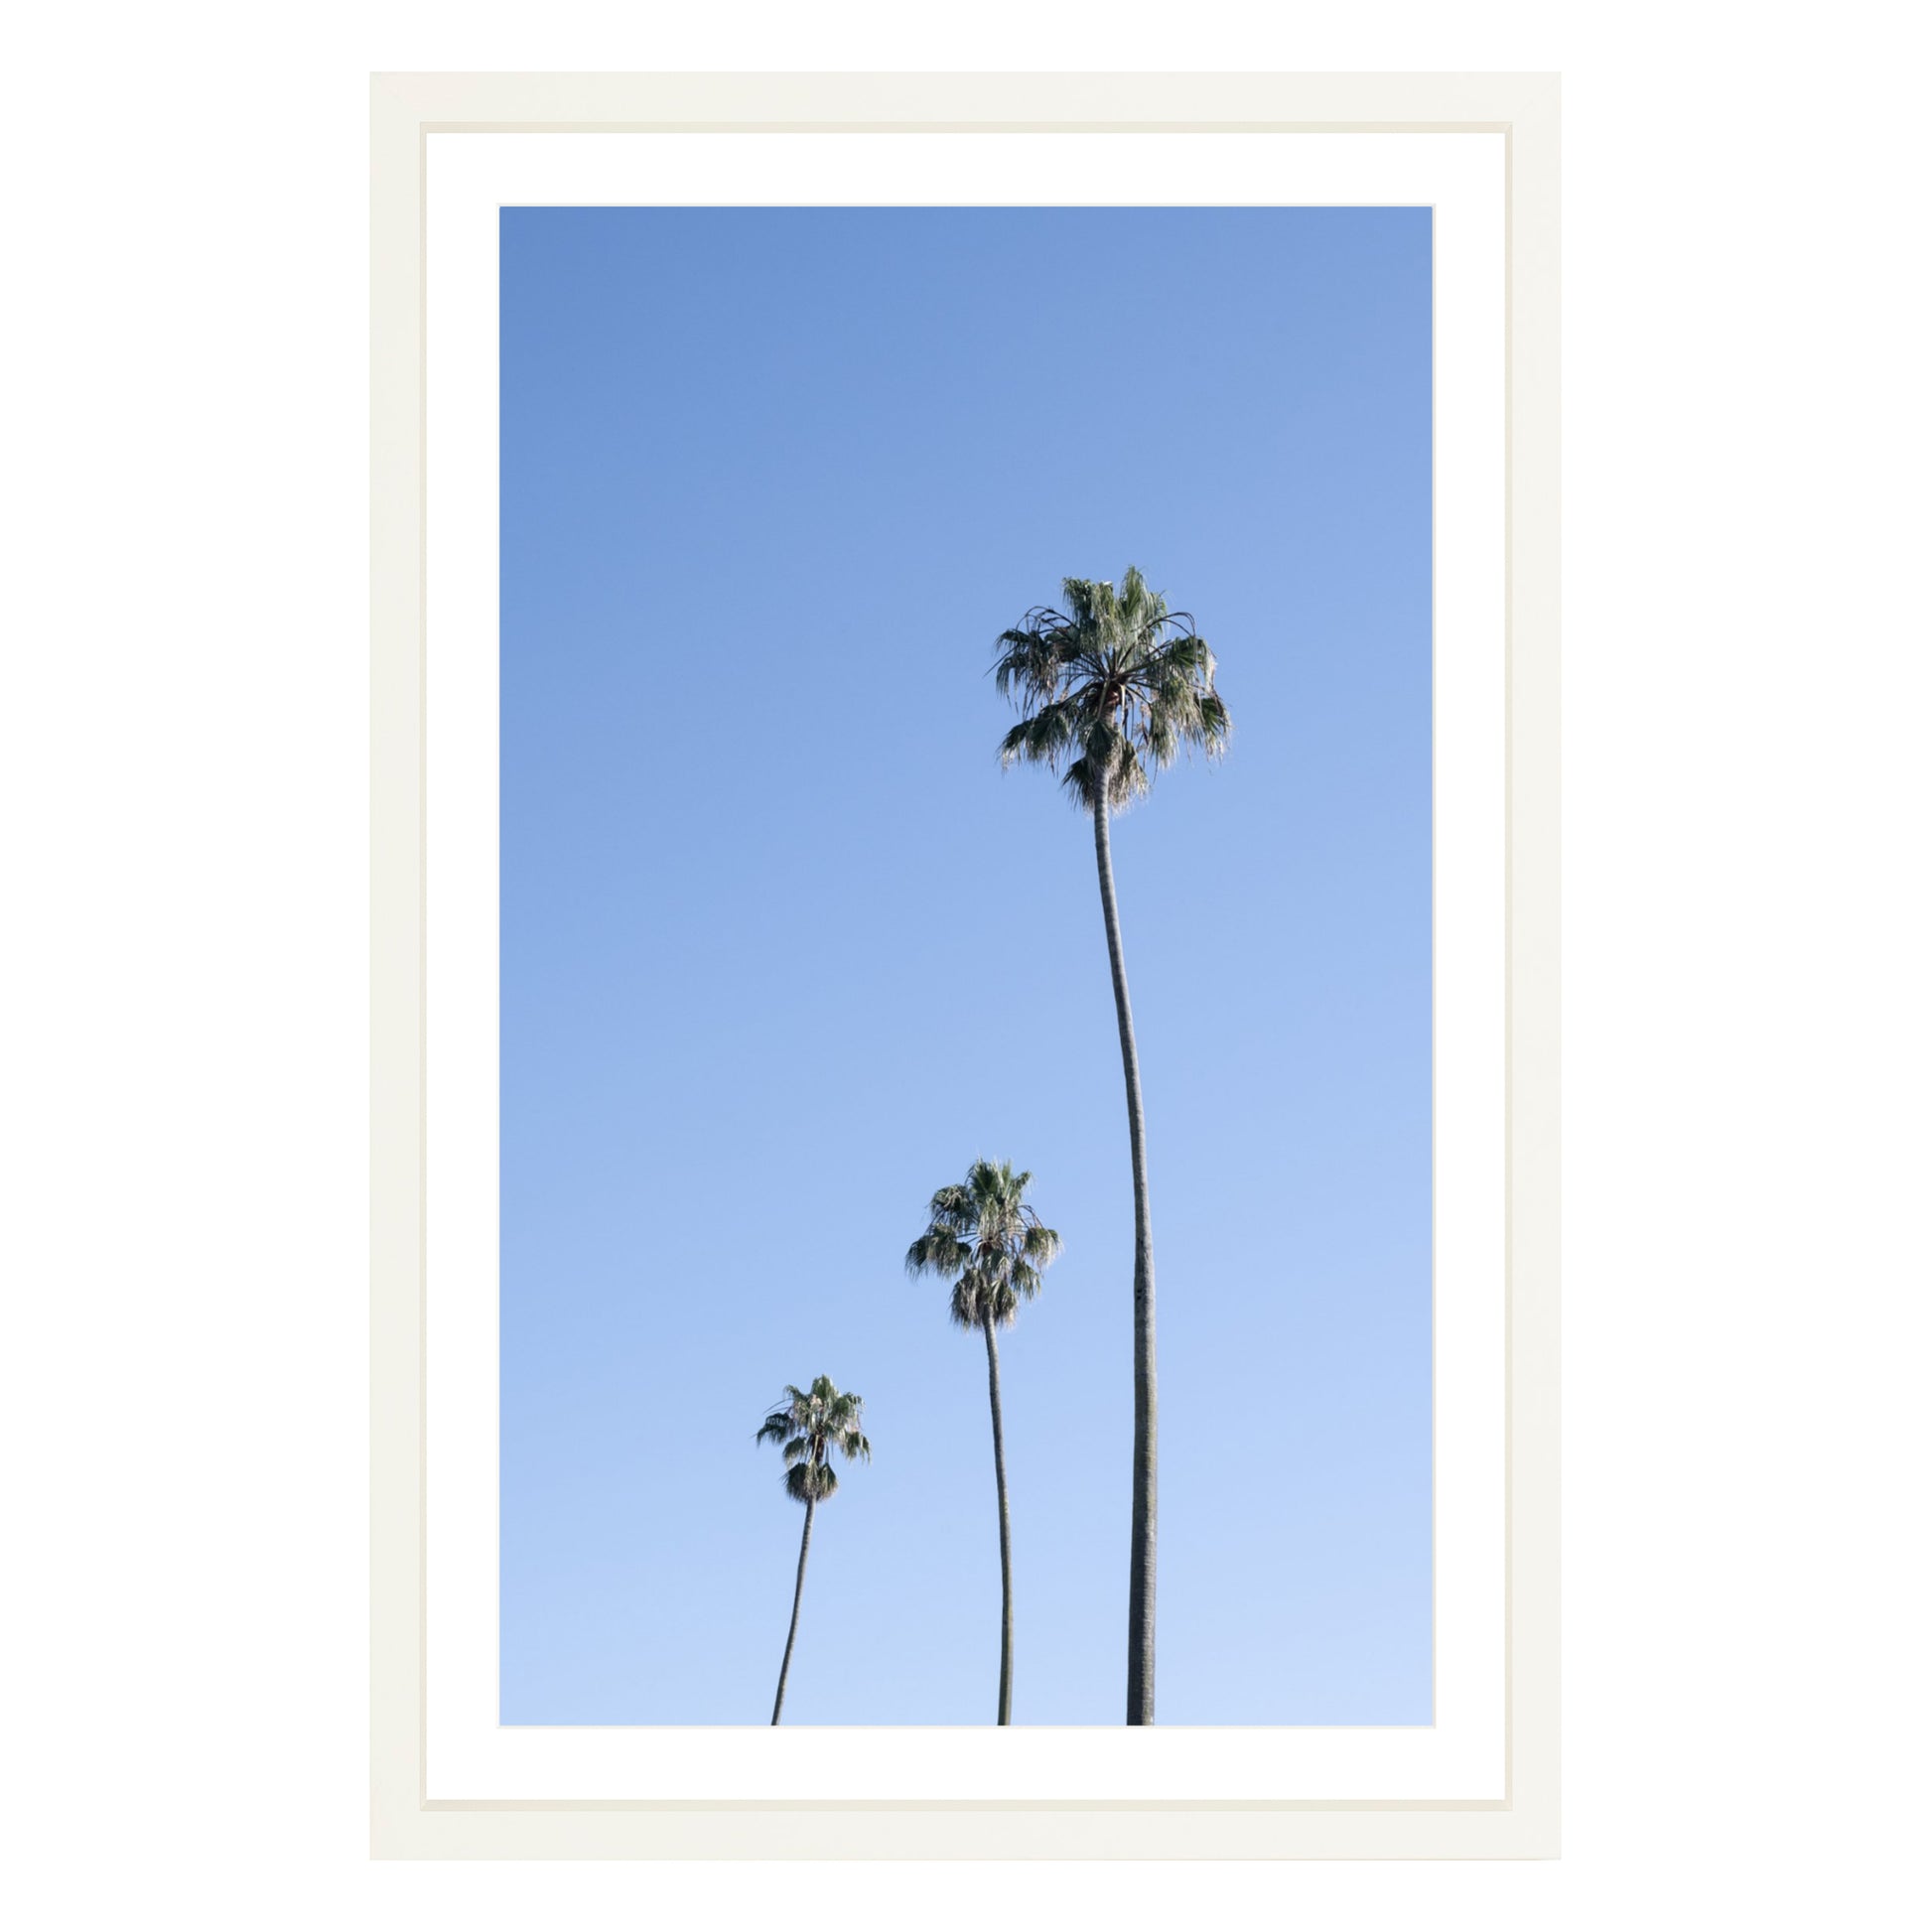 Photograph of three palm trees against blue sky framed in white with white mat